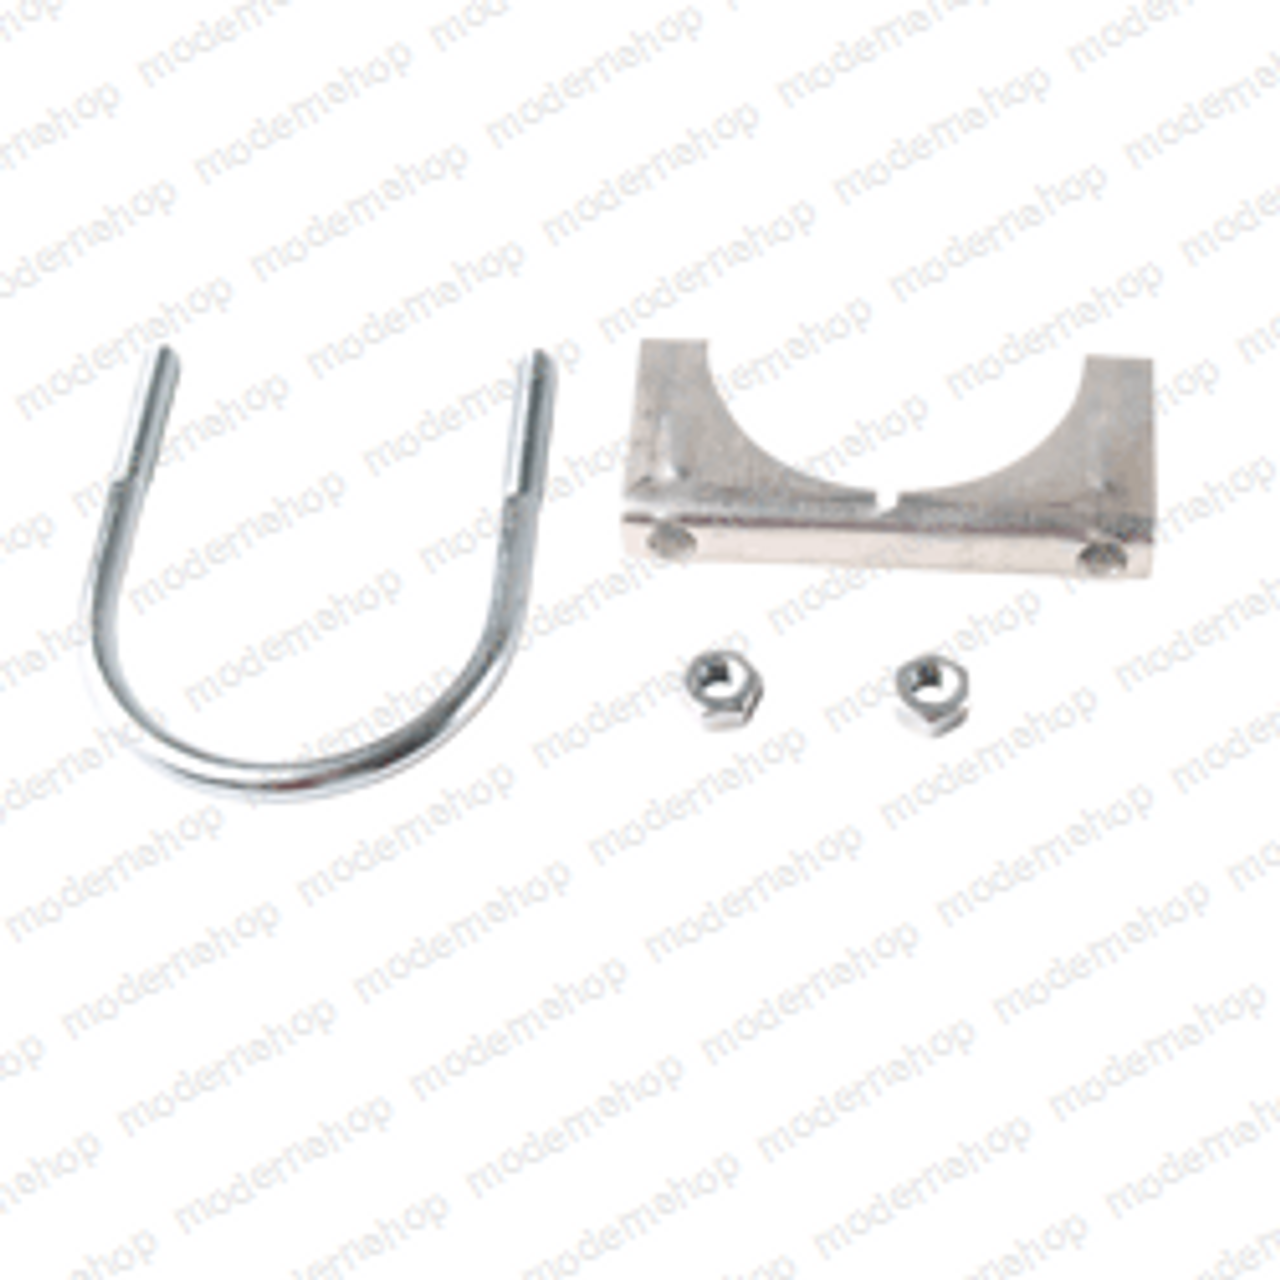 83683175: Lull CLAMP - EXHAUST 2 1/2 INCH